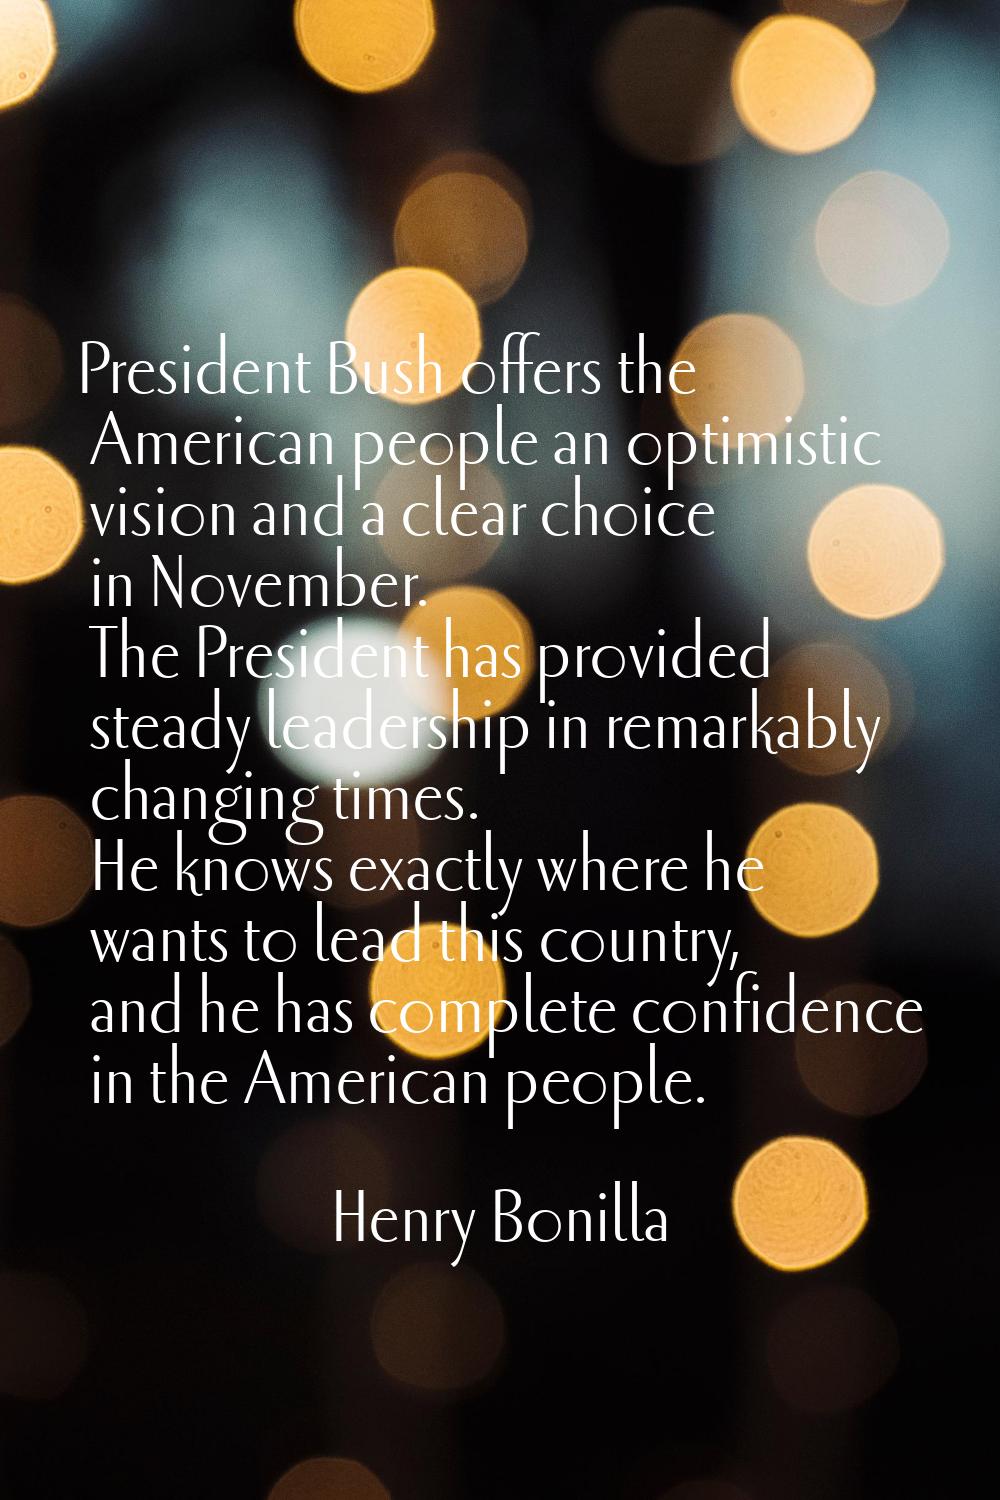 President Bush offers the American people an optimistic vision and a clear choice in November. The 